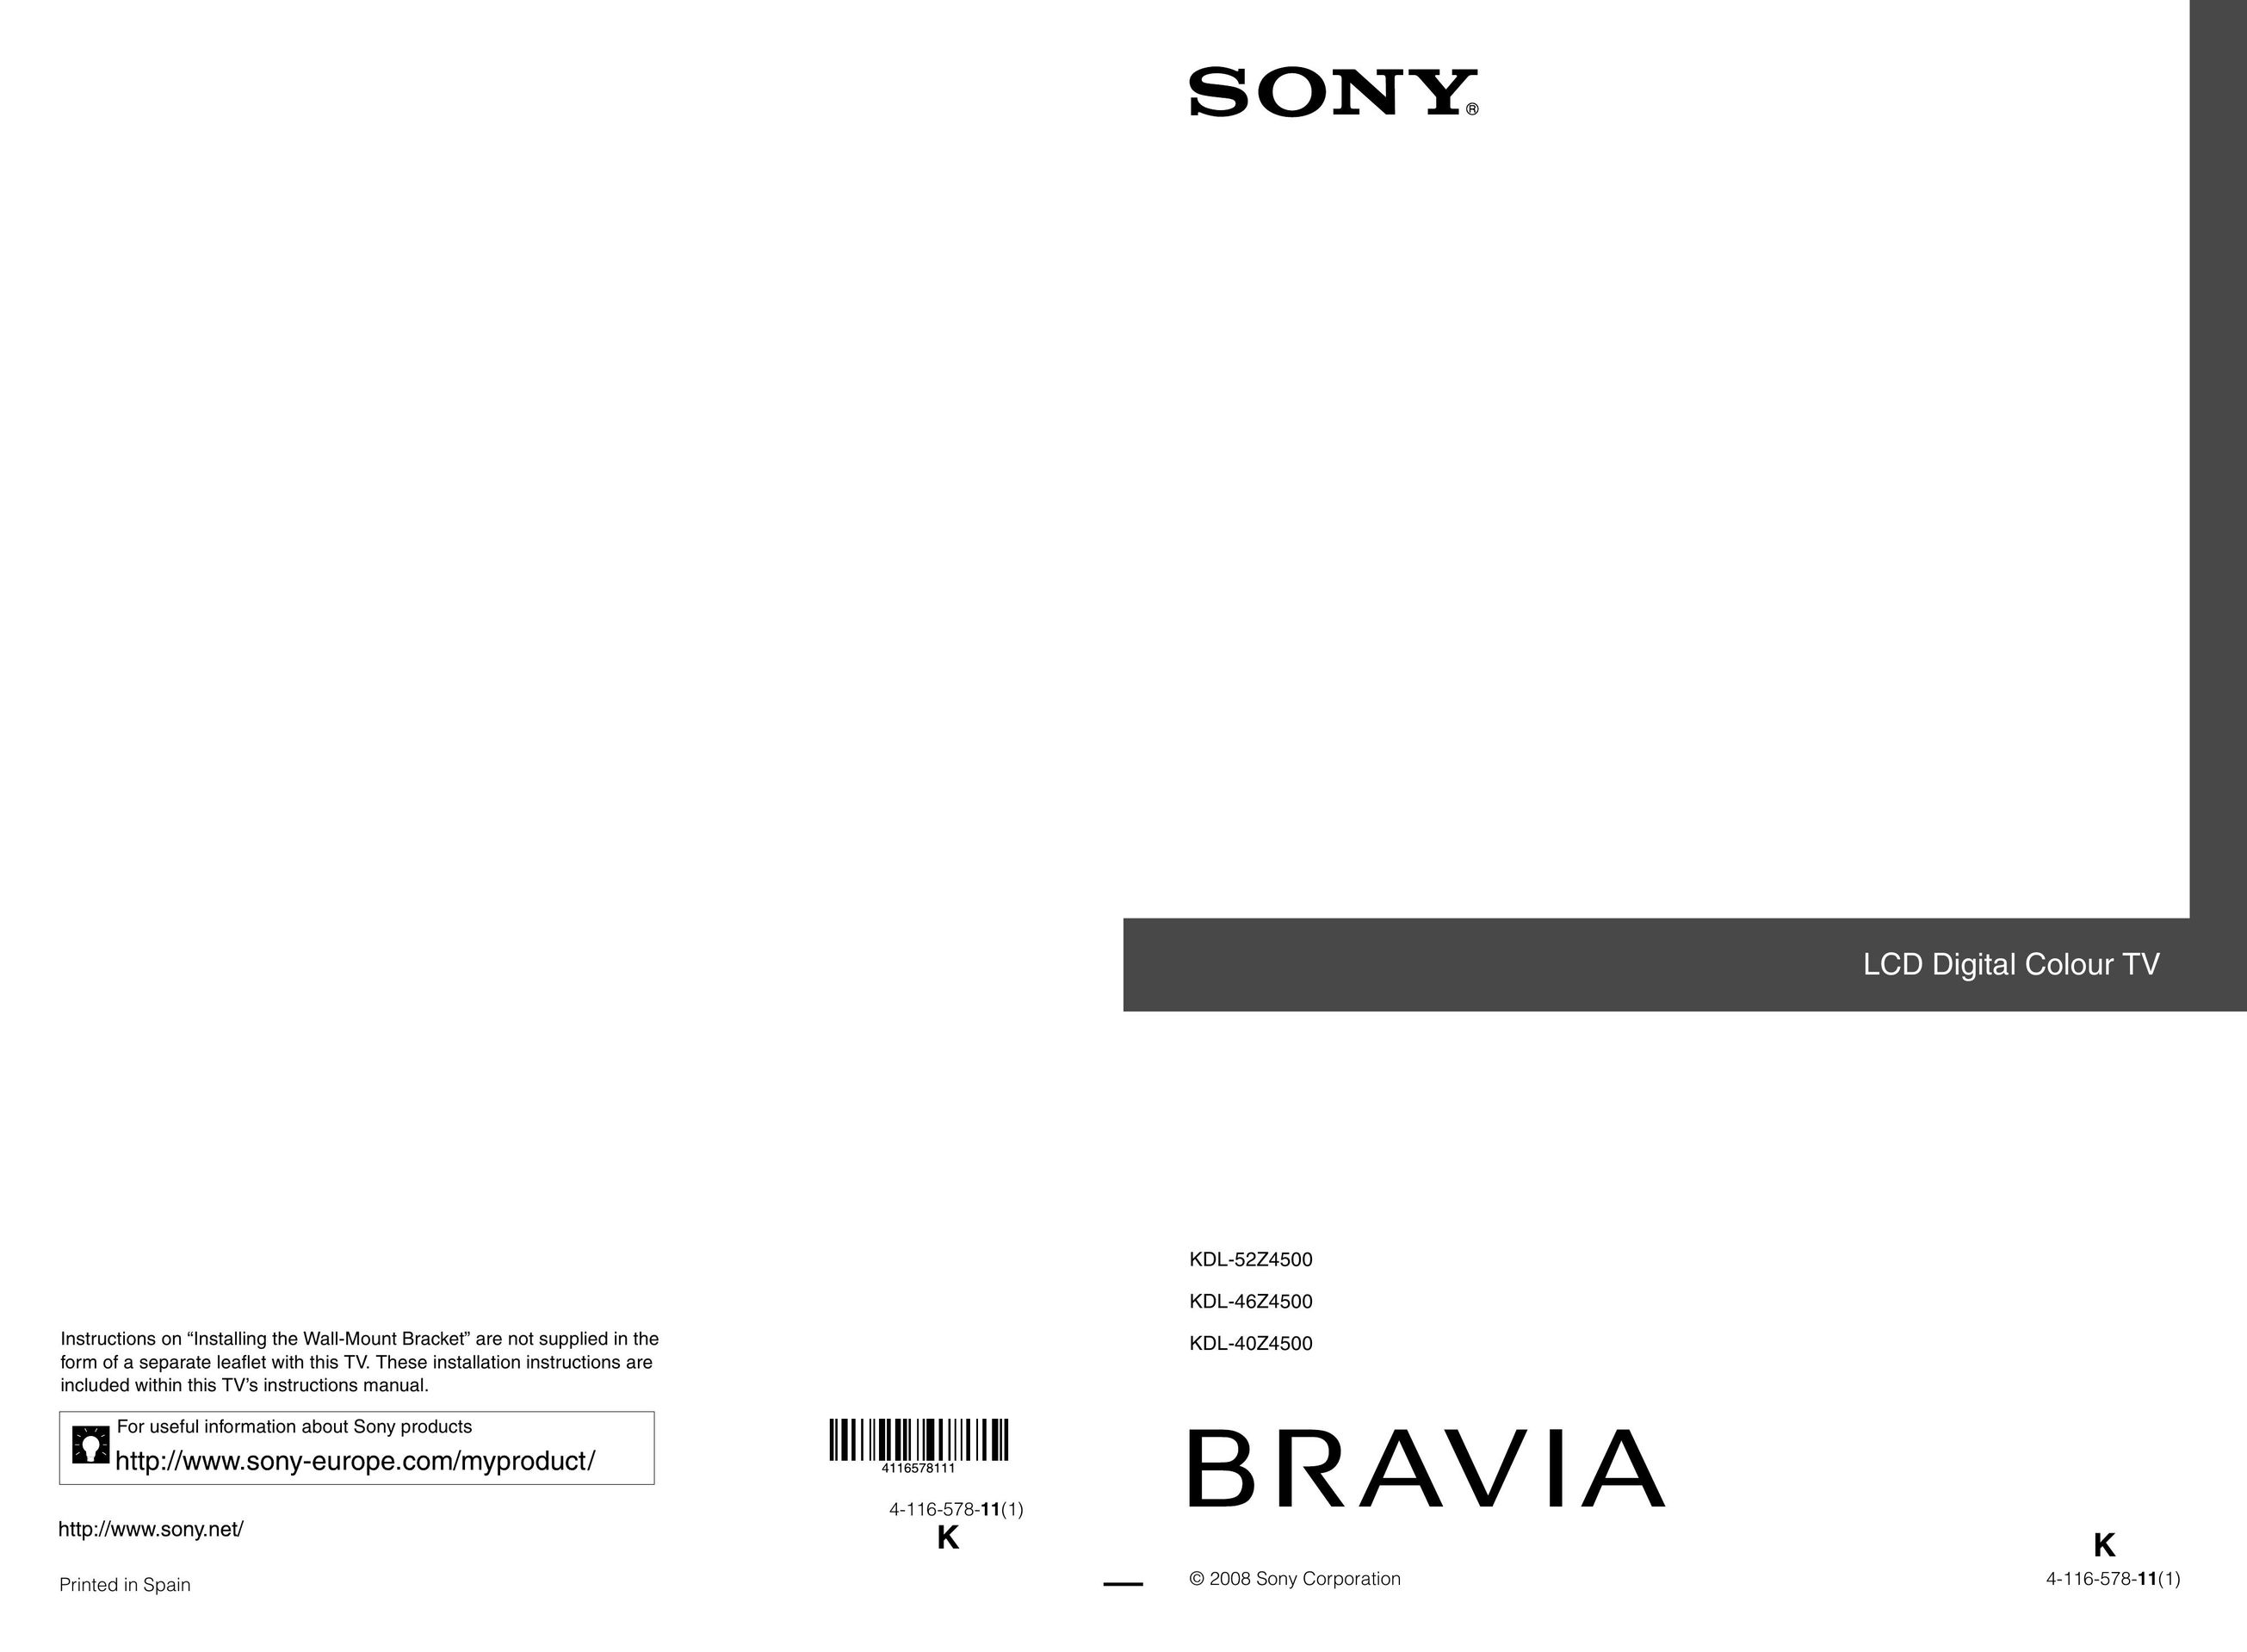 Sony 4-116-578-11(1) Flat Panel Television User Manual